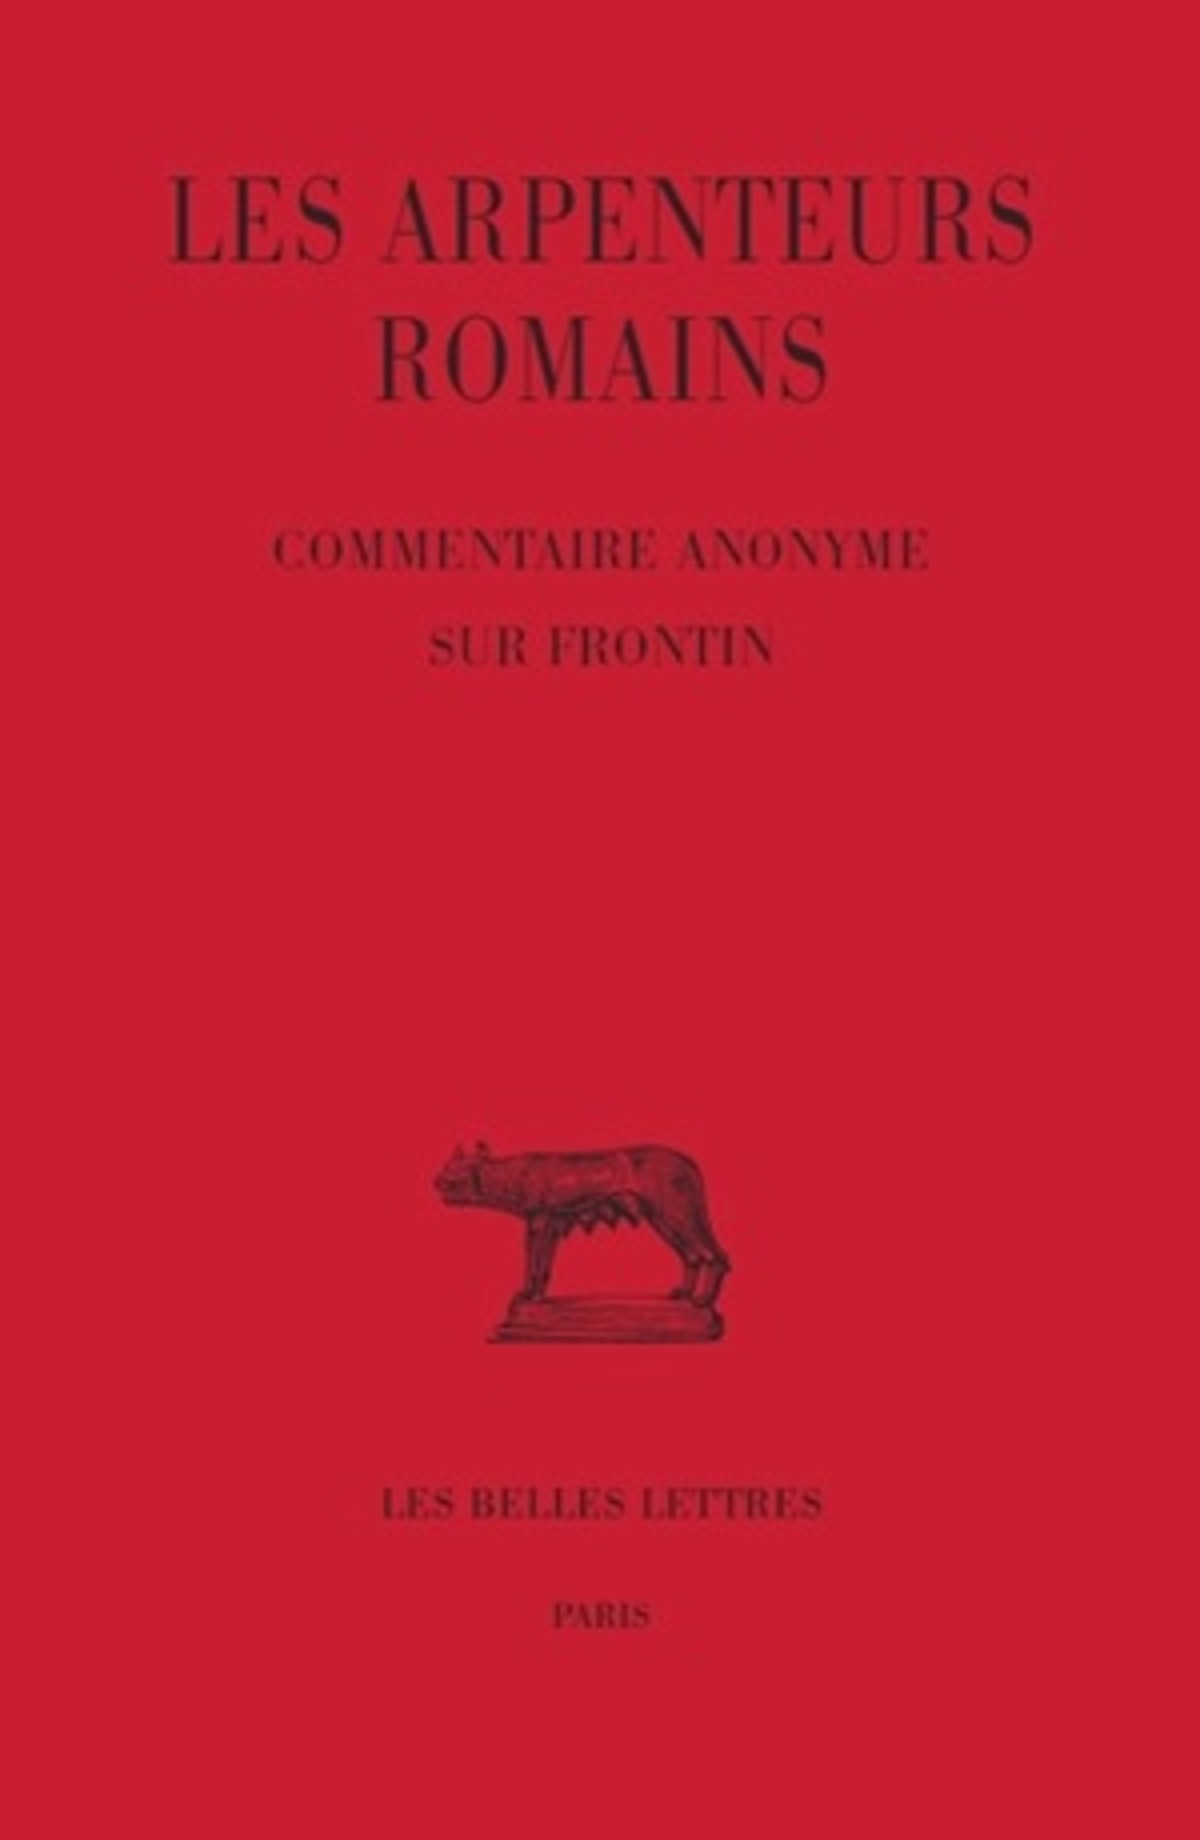 Les Arpenteurs romains. Tome III : Commentaire anonyme sur Frontin